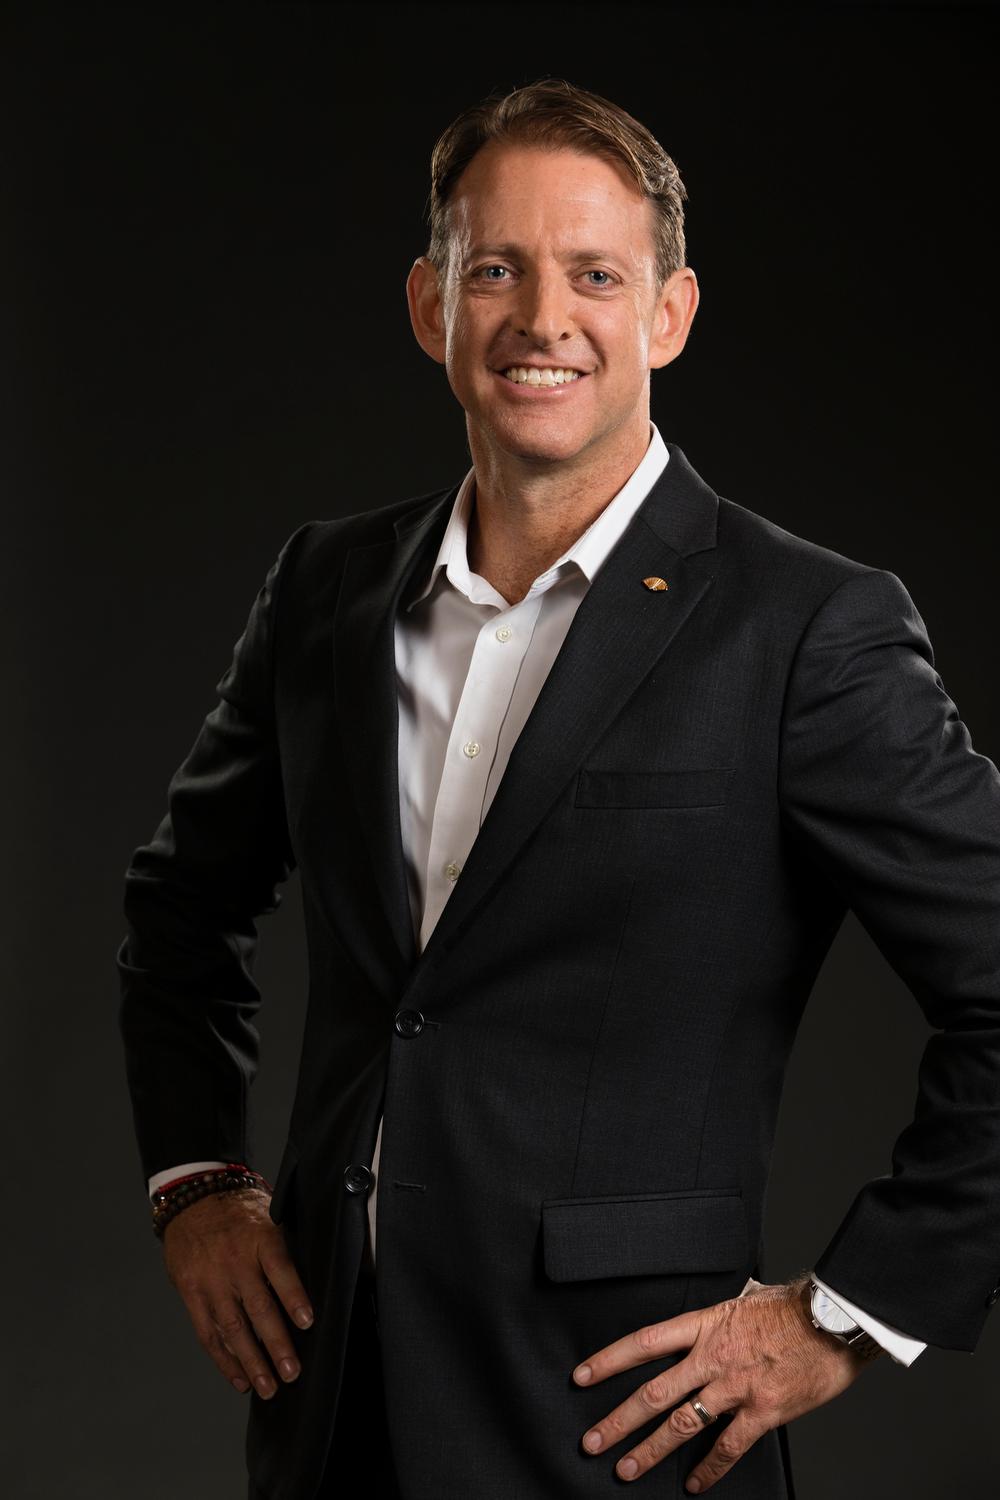 Jeremy McCarthy, group director of spa & wellness at Mandarin Oriental Hotel Group, was honoured with the 2019 ISPA Visionary Award / 